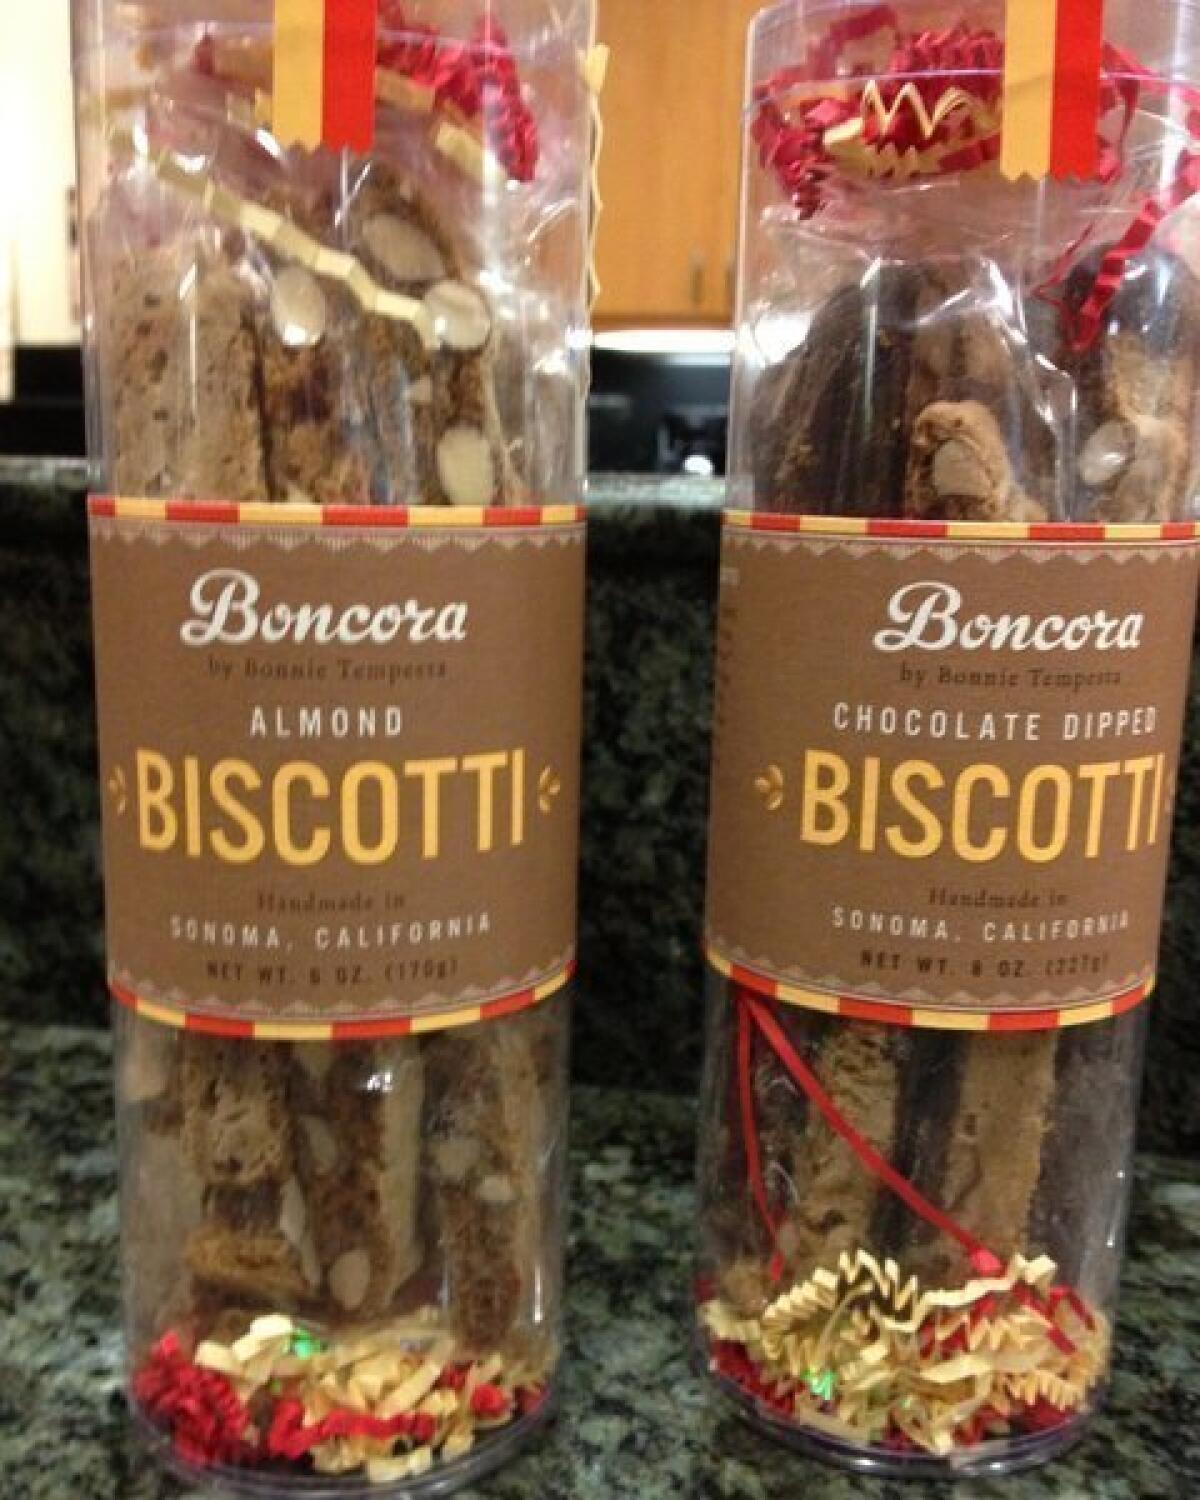 Bonnie Tempesta is back in her kitchen making her famous biscotti.